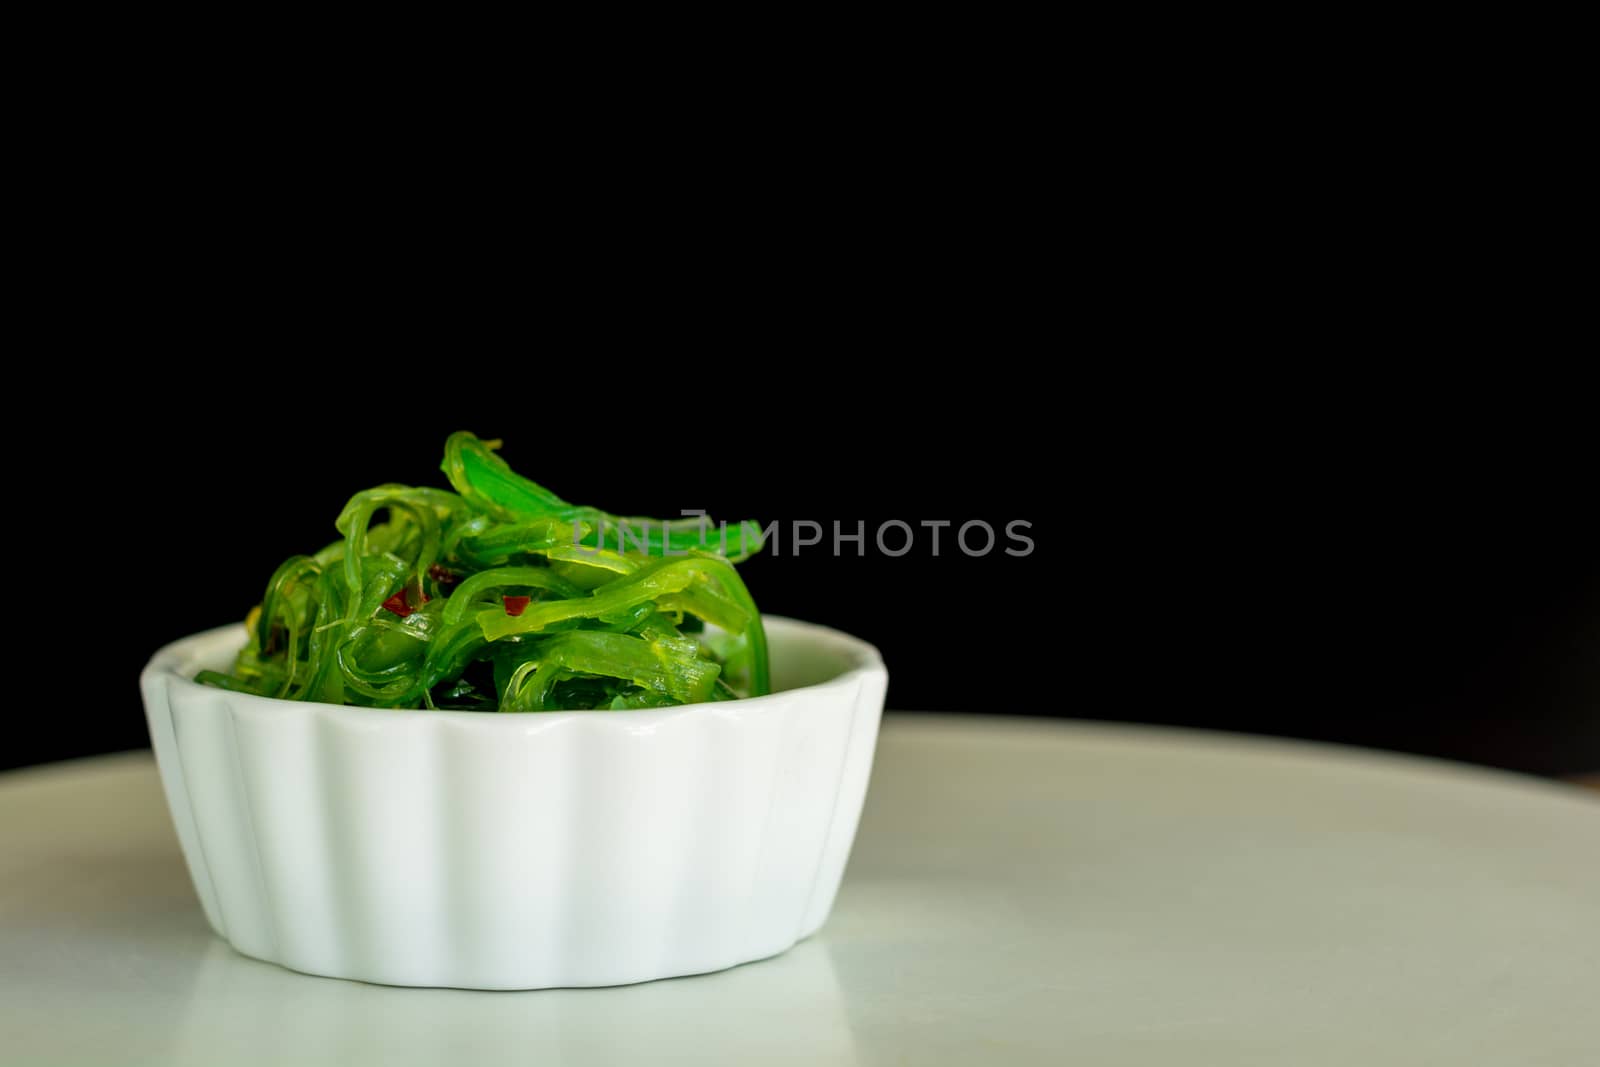 Japanese food concept. Fresh seaweed salad with sesame seeds in white bowl on black background.